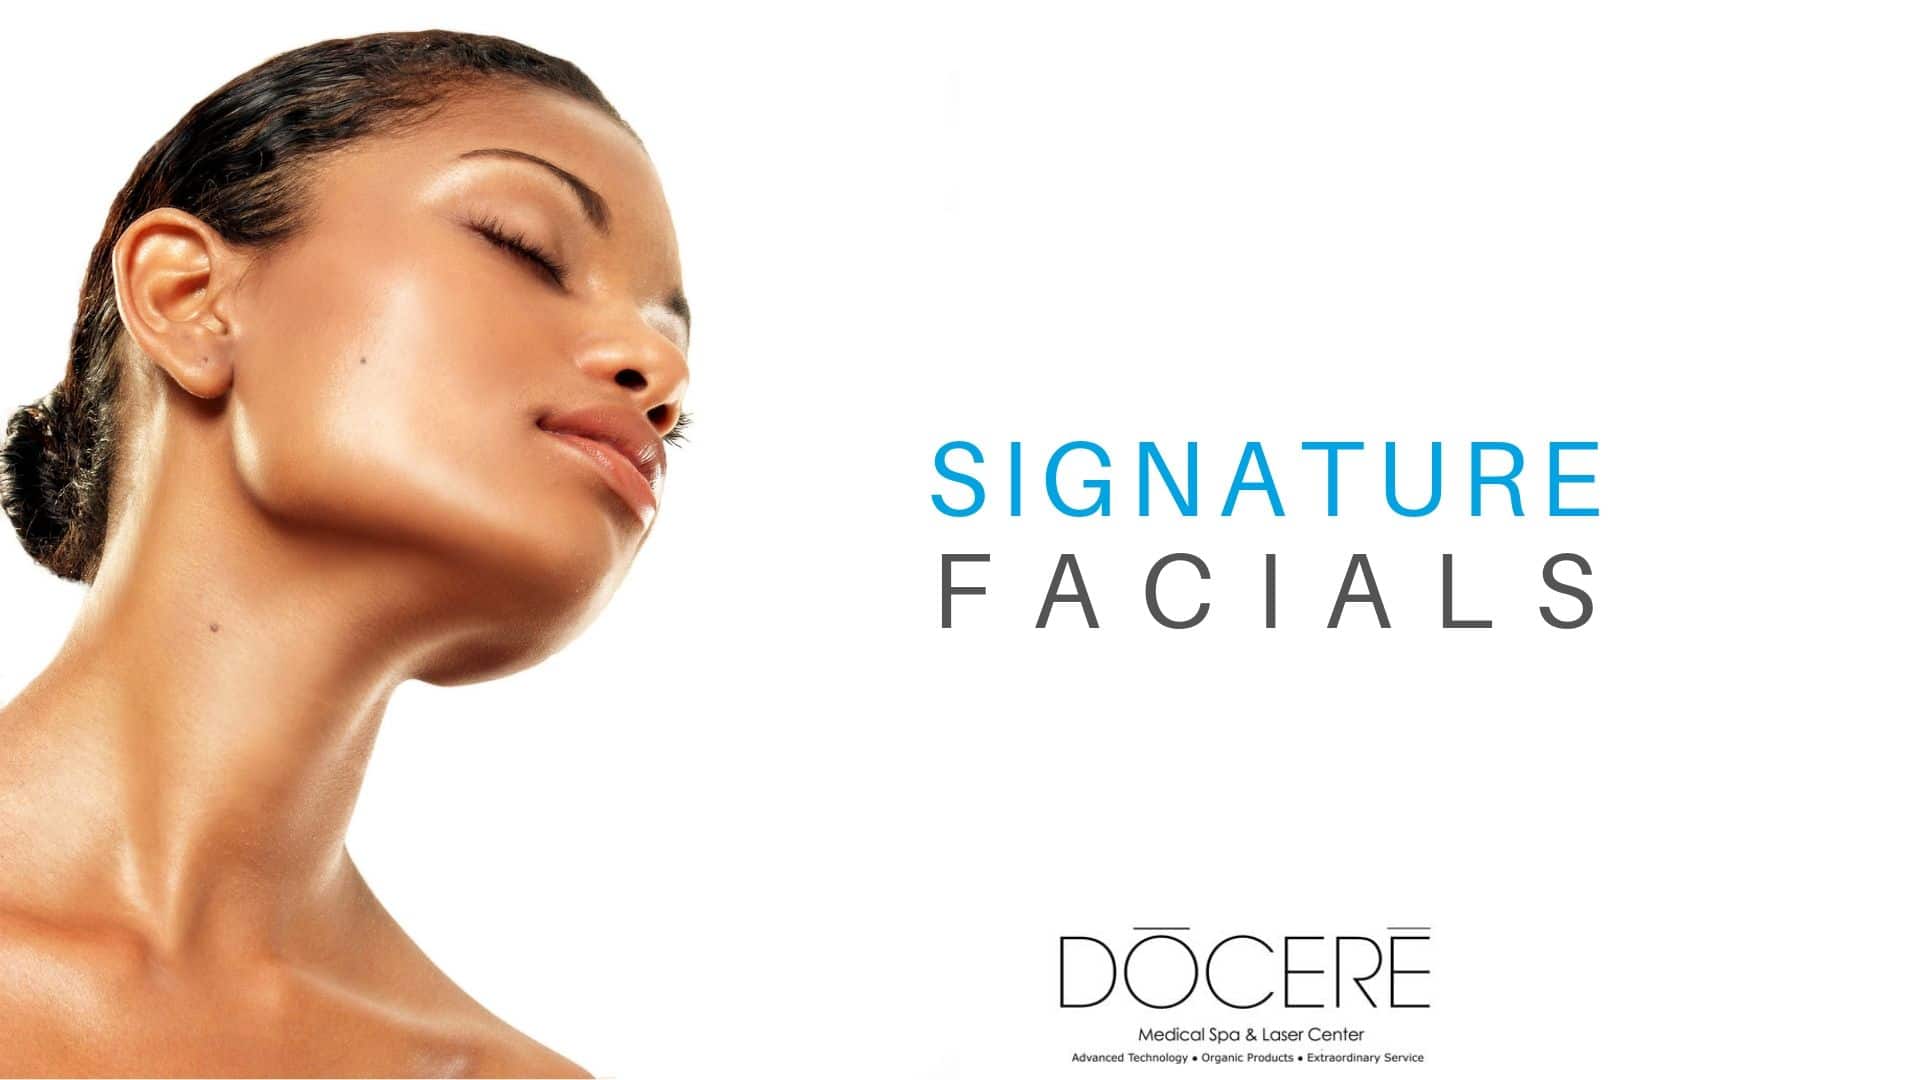 Woman modeling with radiant skin from signature facials at docere medspa.